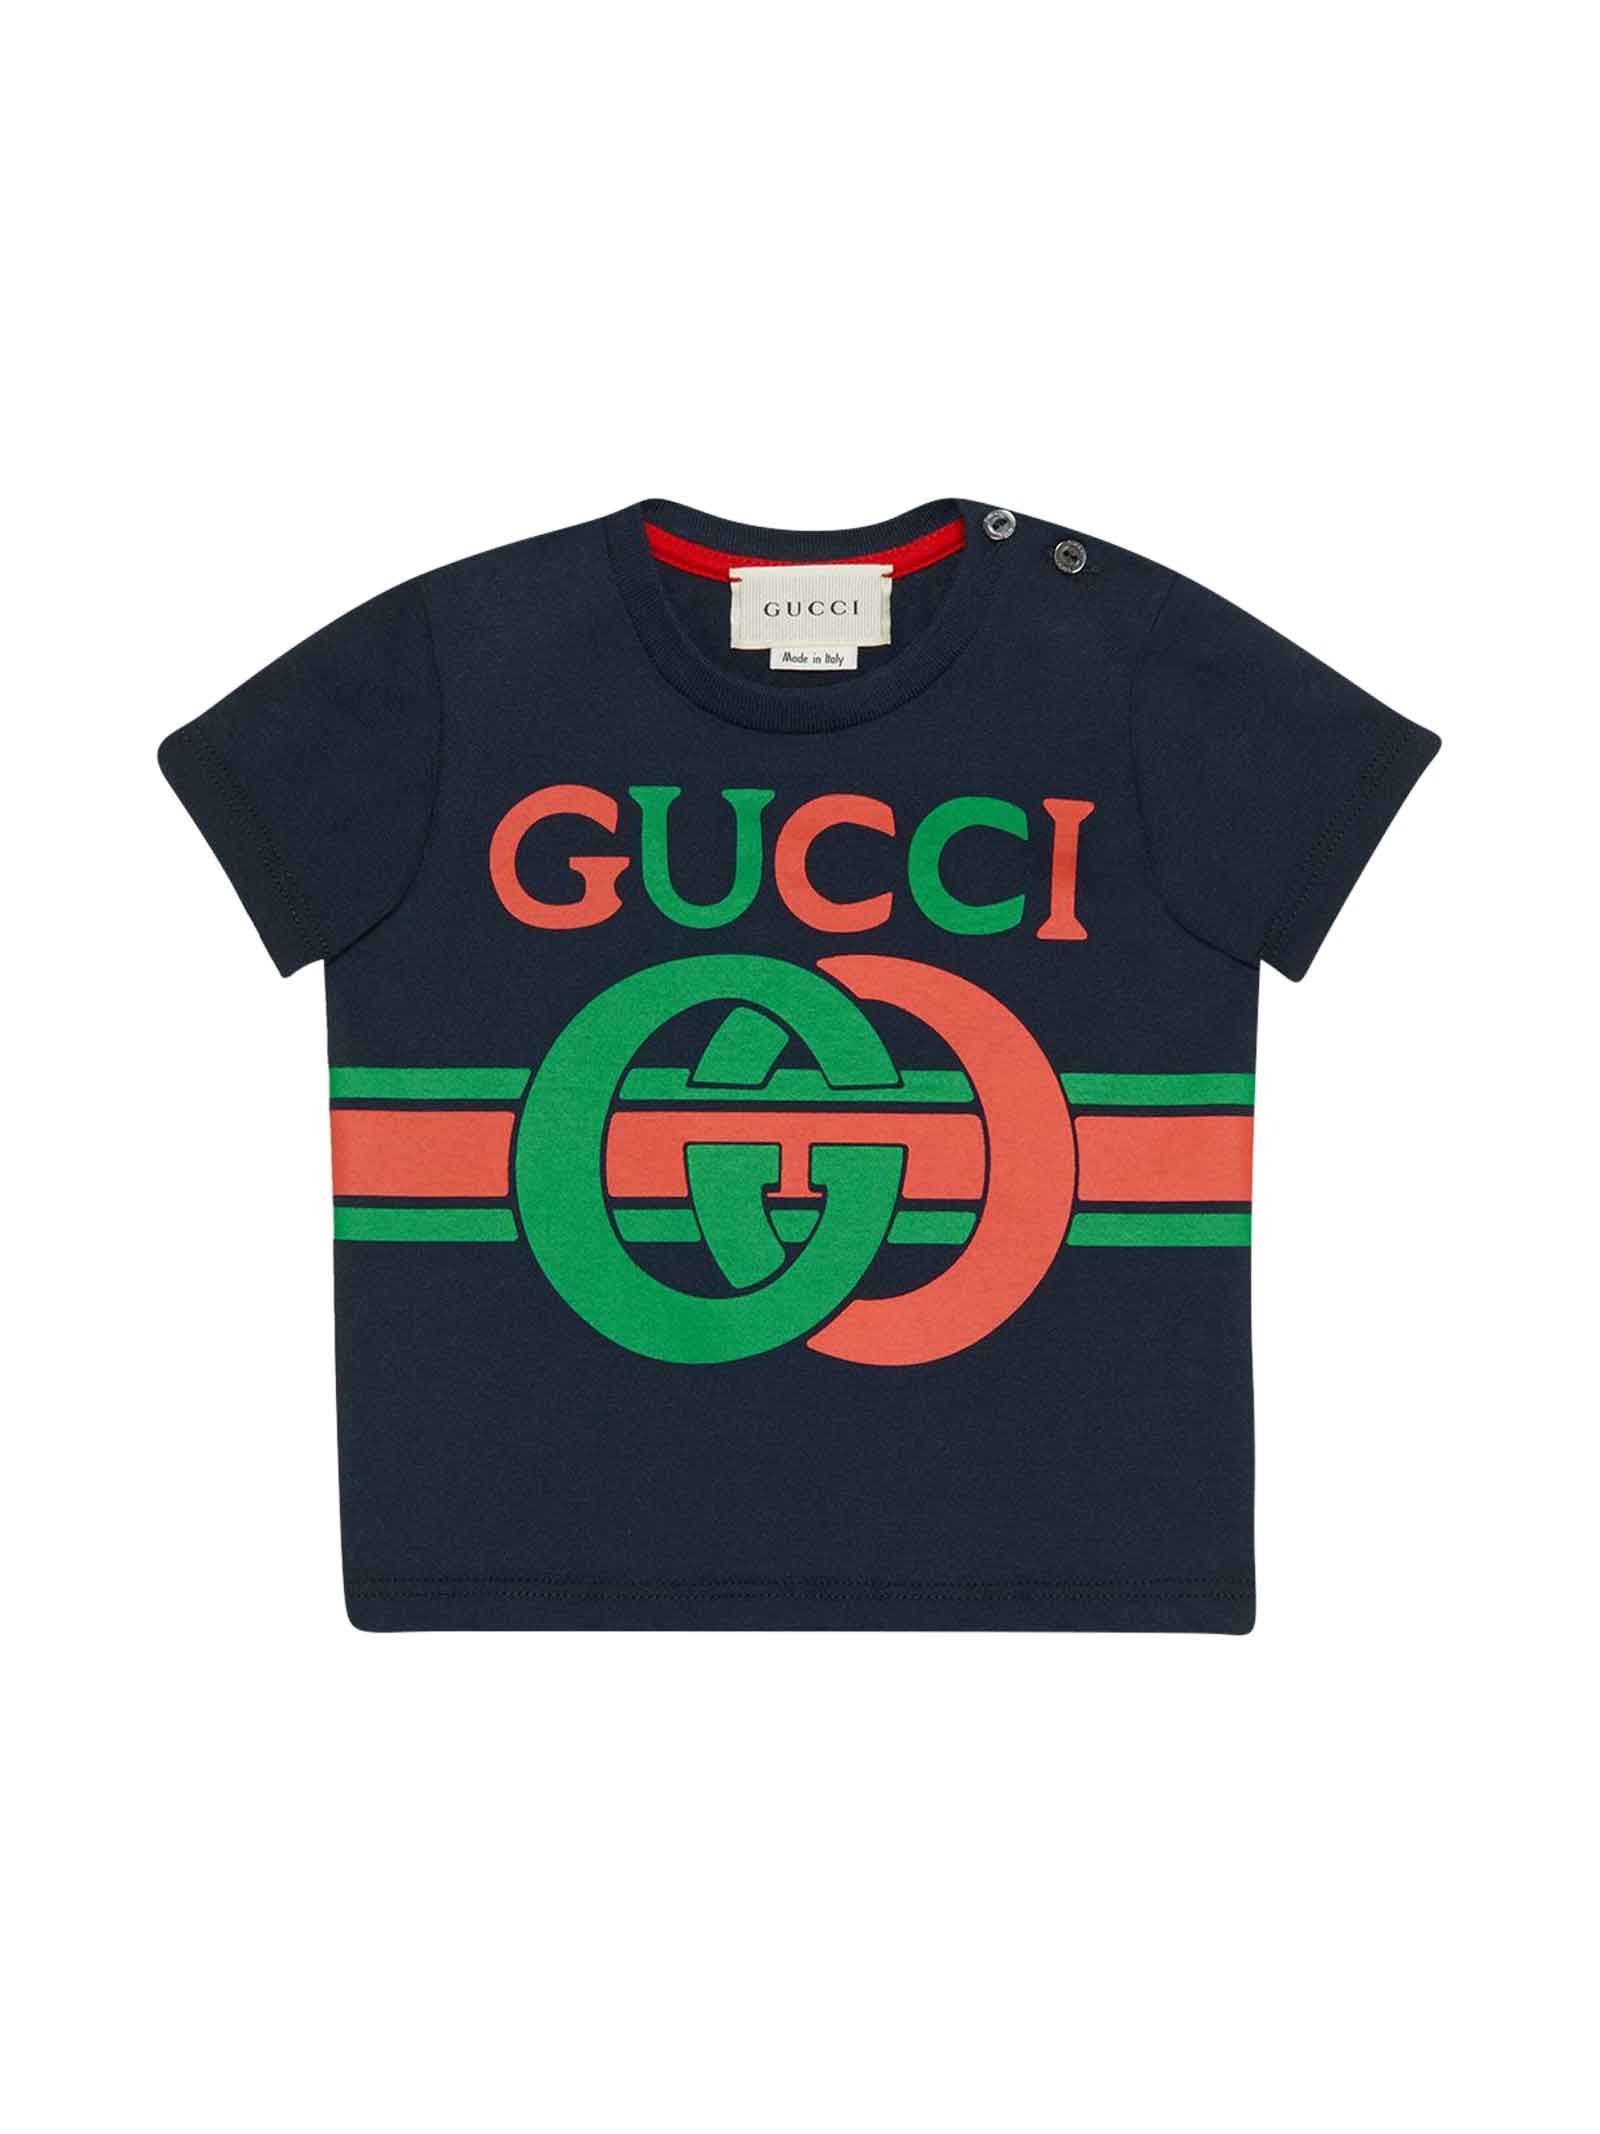 GUCCI BLUE T-SHIRT WITH FRONTAL LOGO,548034XJBCG 4585